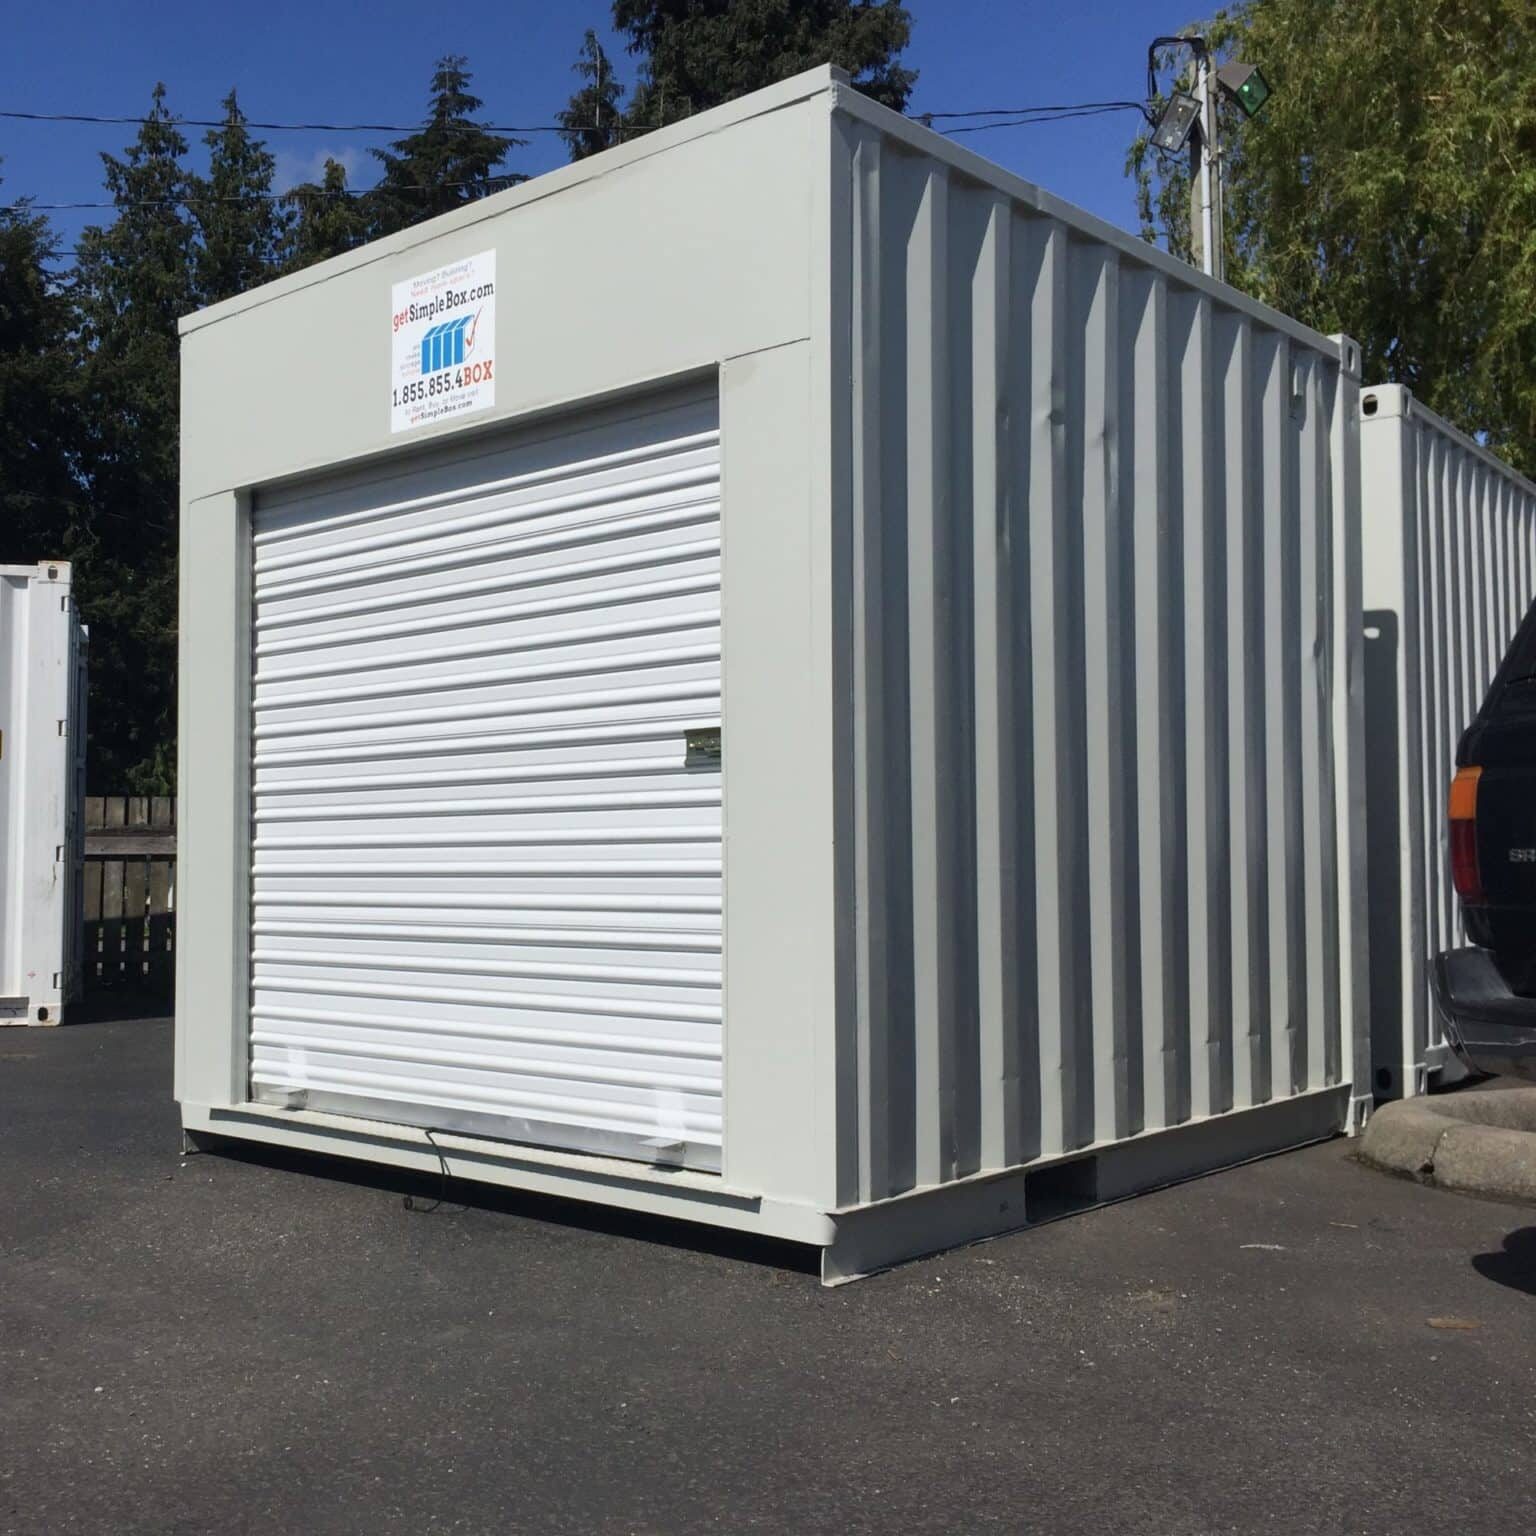 8x10 Contianer with a shipping container roll-up door